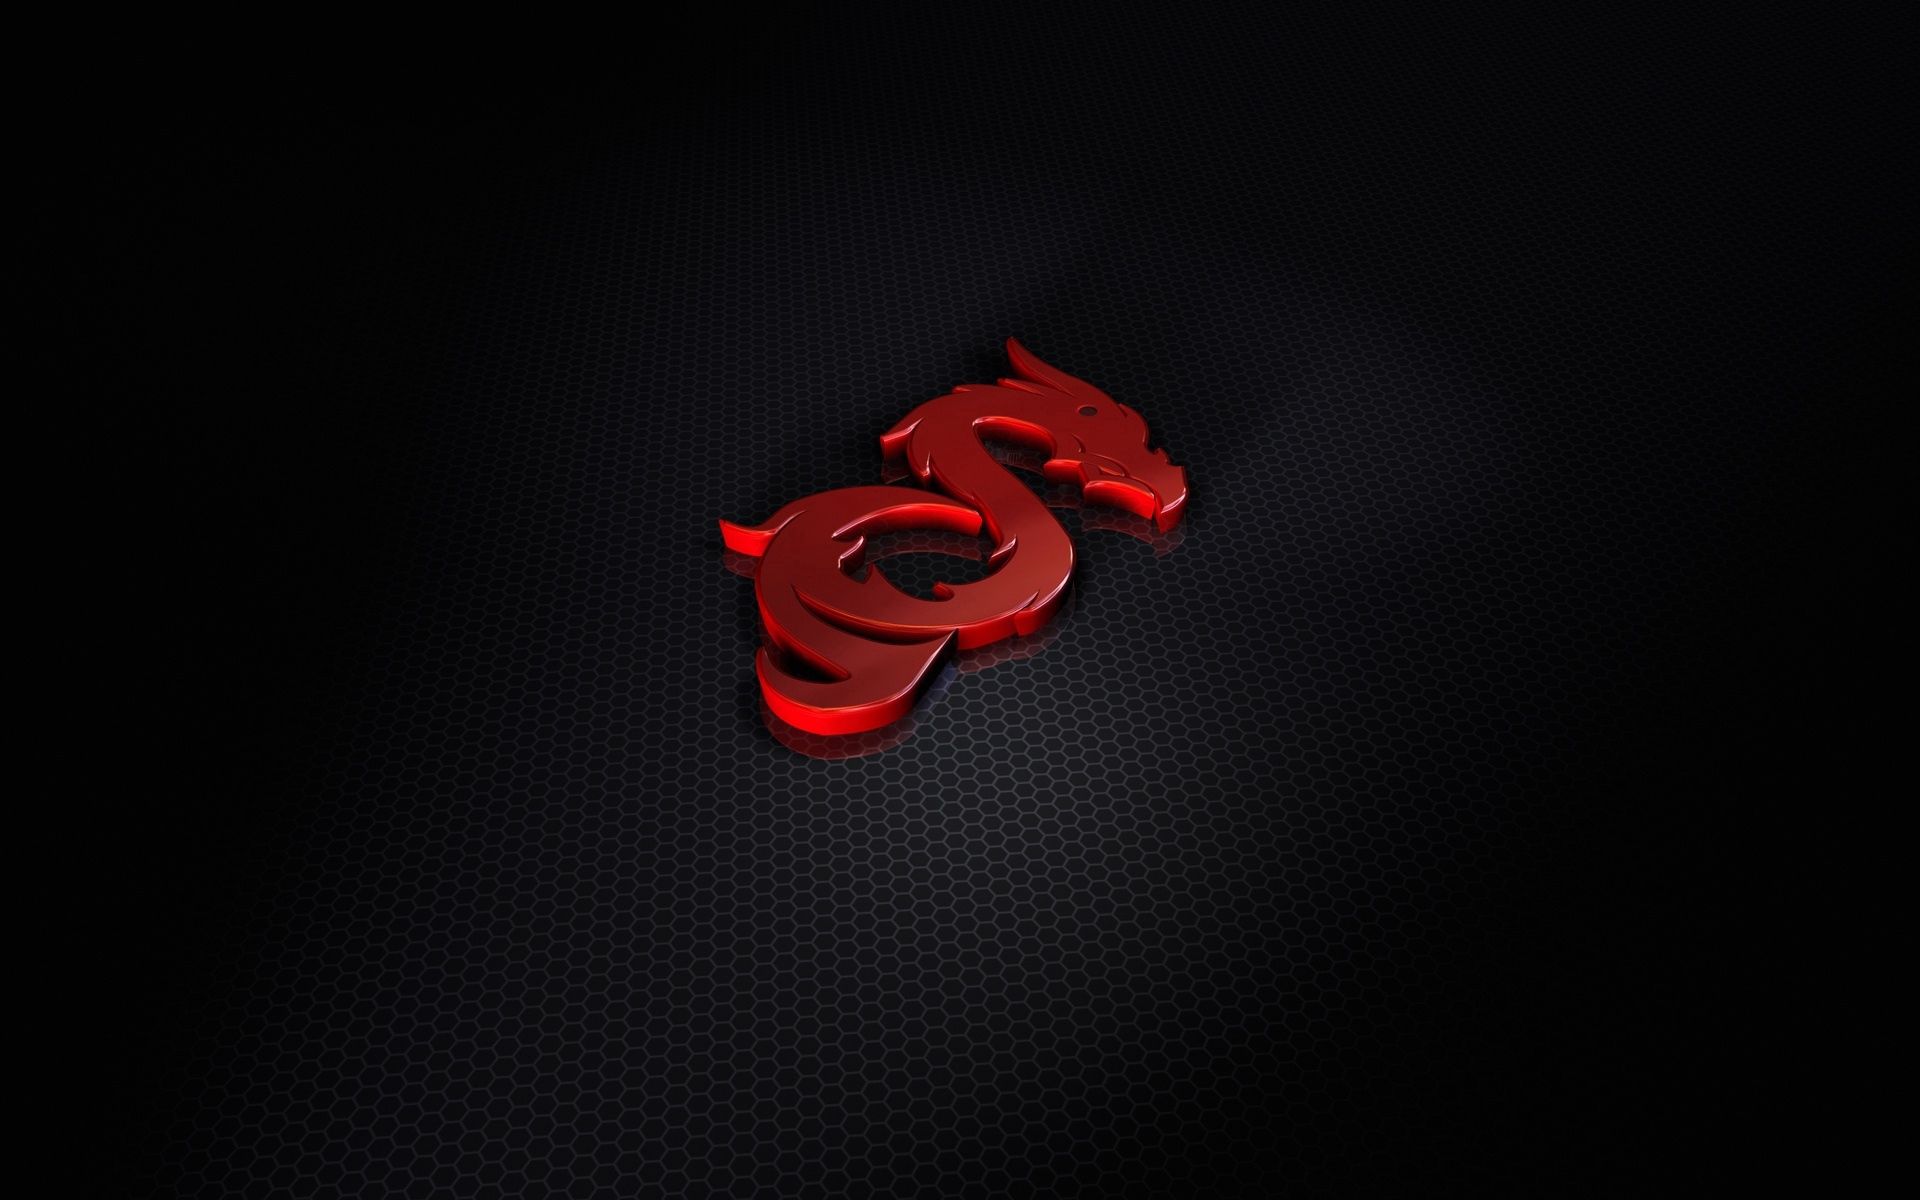 98941 download wallpaper 3d, surface, dragon, symbol screensavers and pictures for free